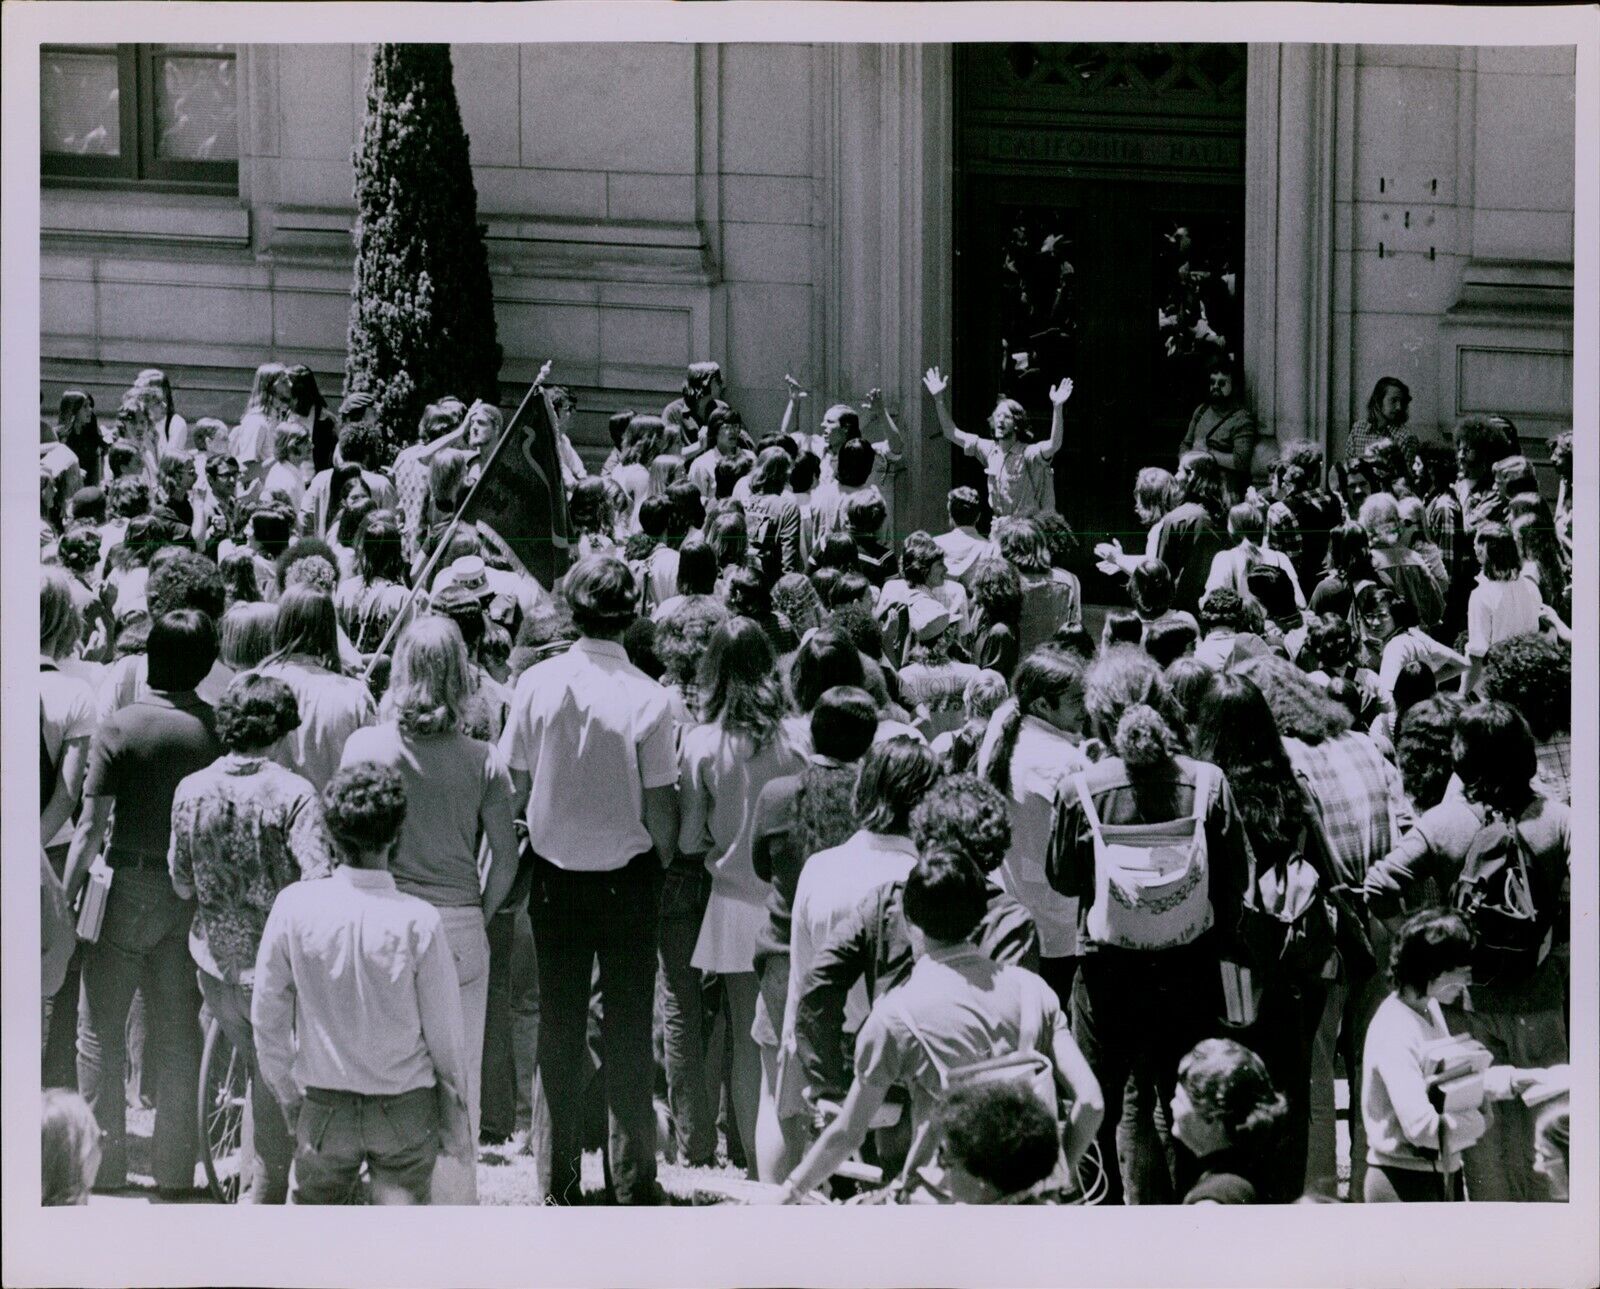 LG863 1974 Original Howard Erker Photo COLLEGE STUDENTS PROTEST Liberal Hippies